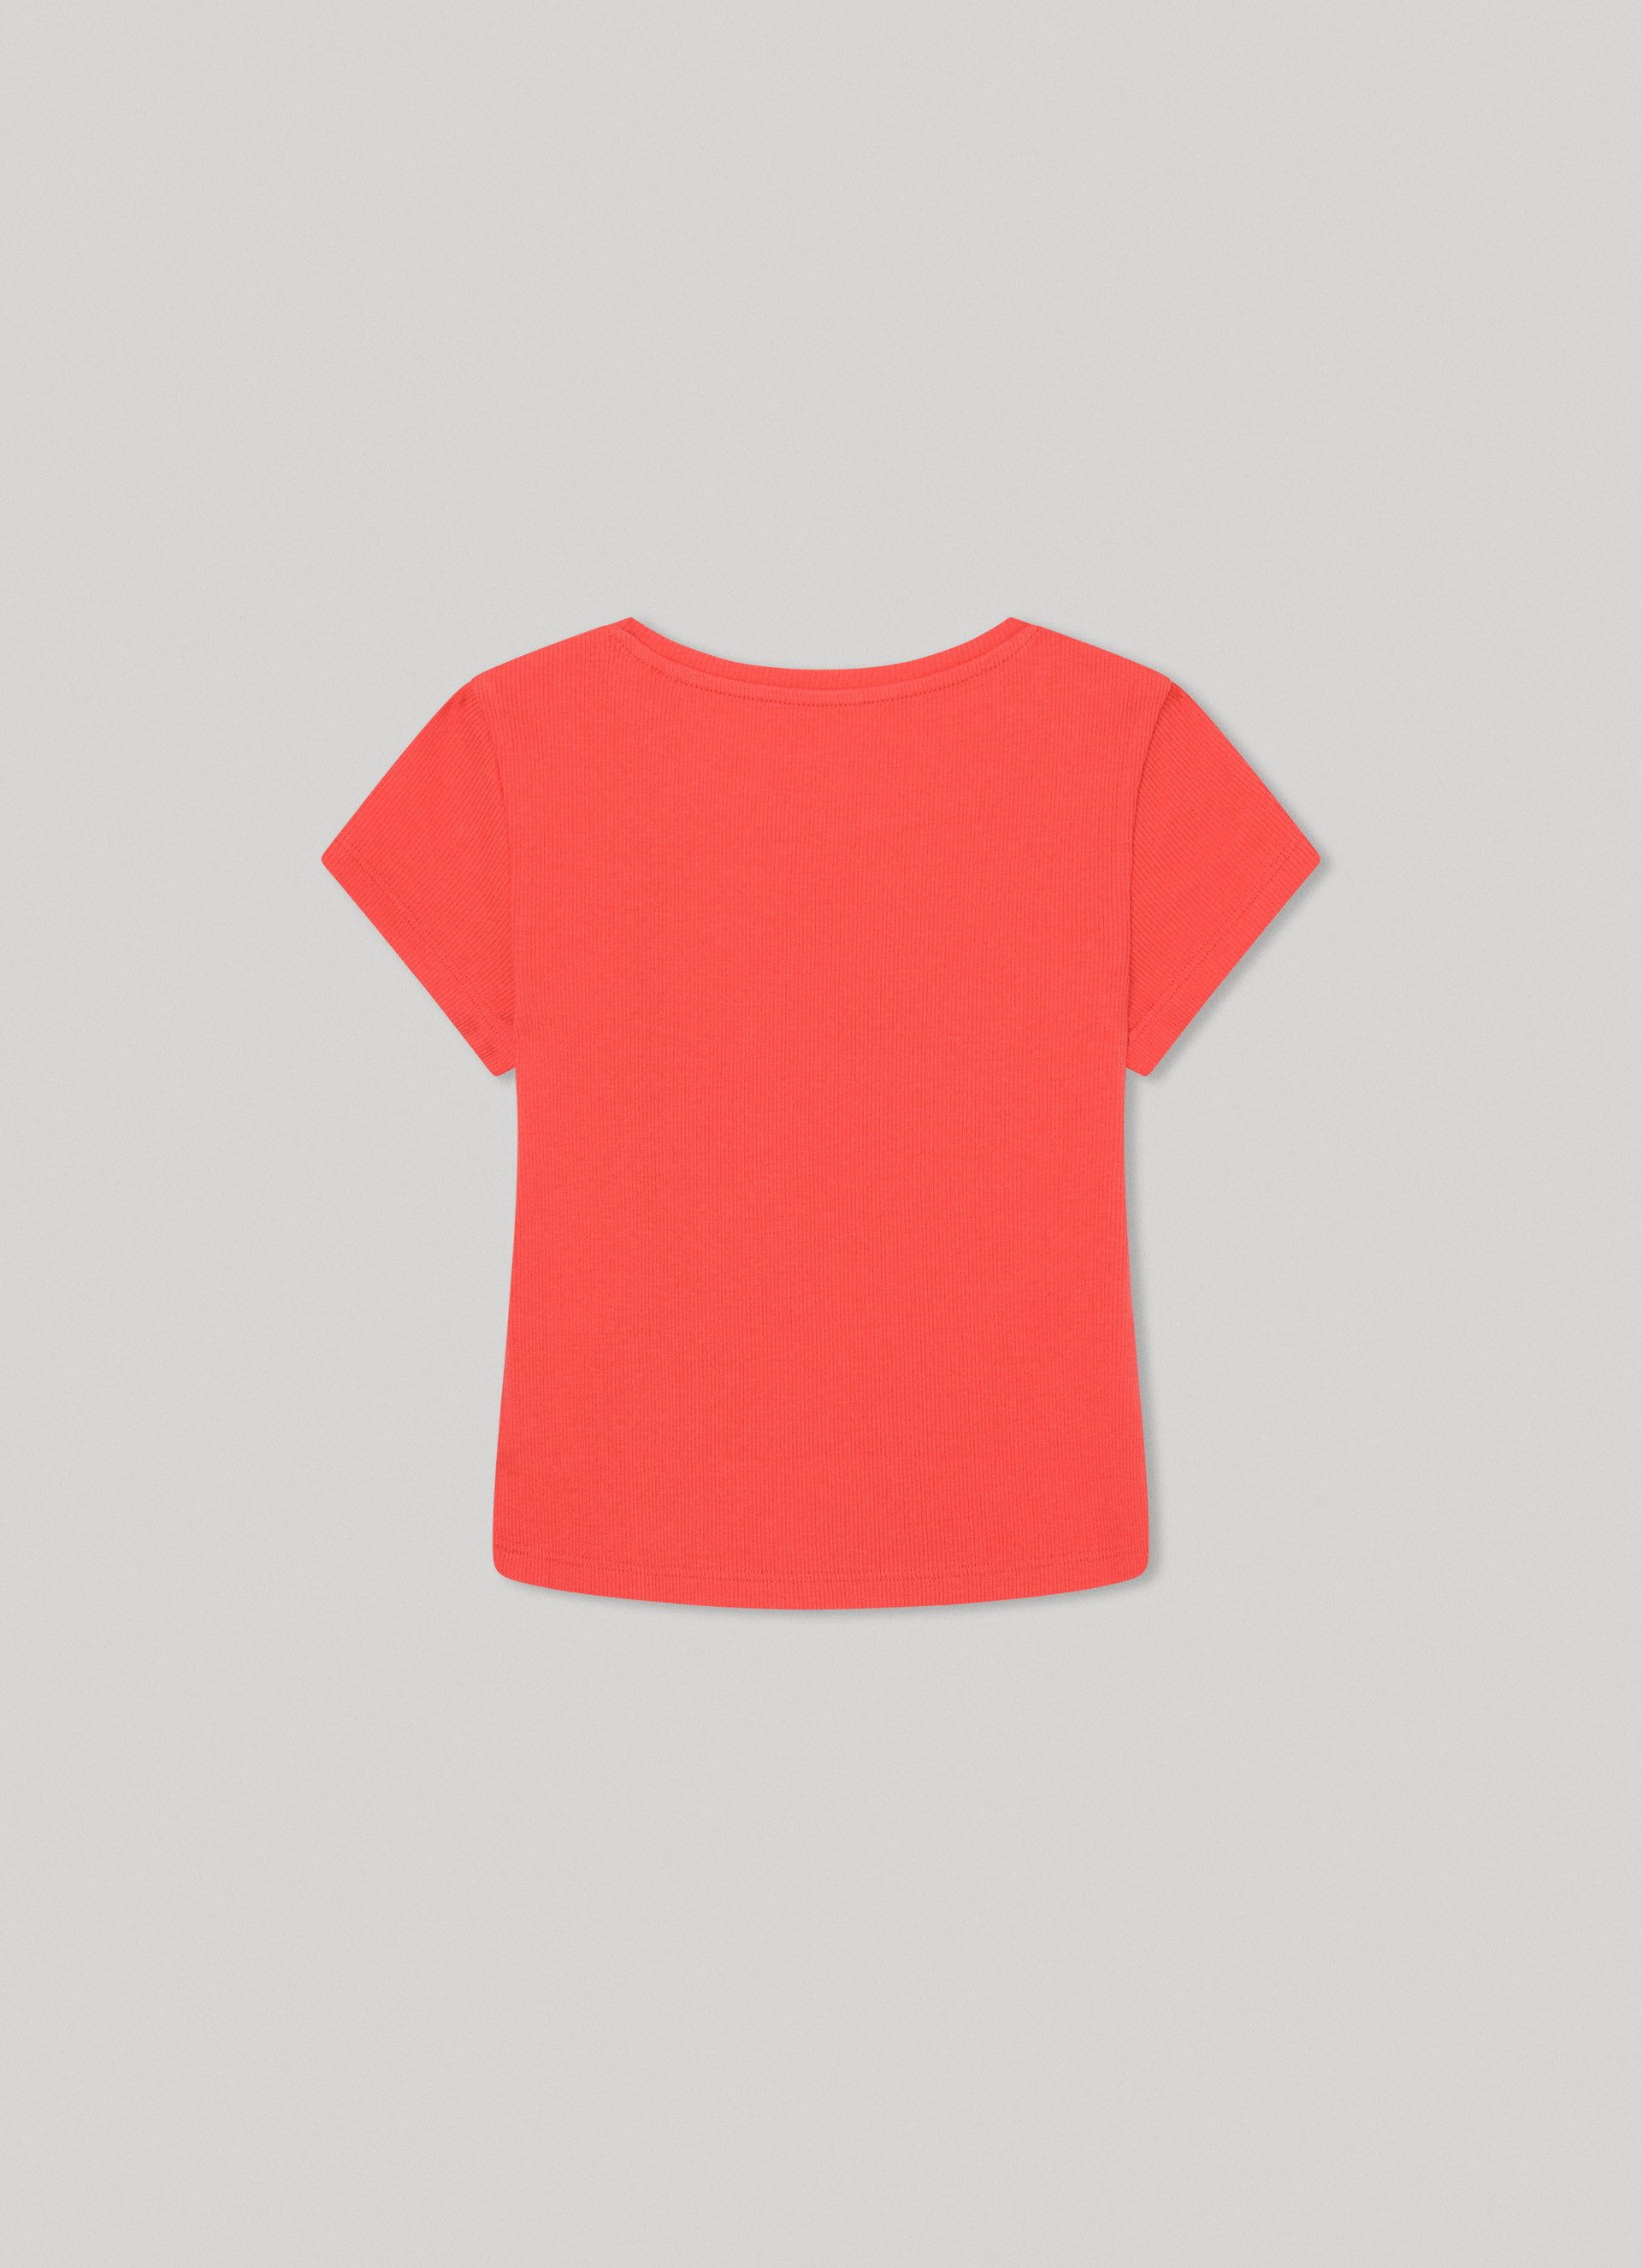 Pepe Jeans T-shirt NICOLLE for girls